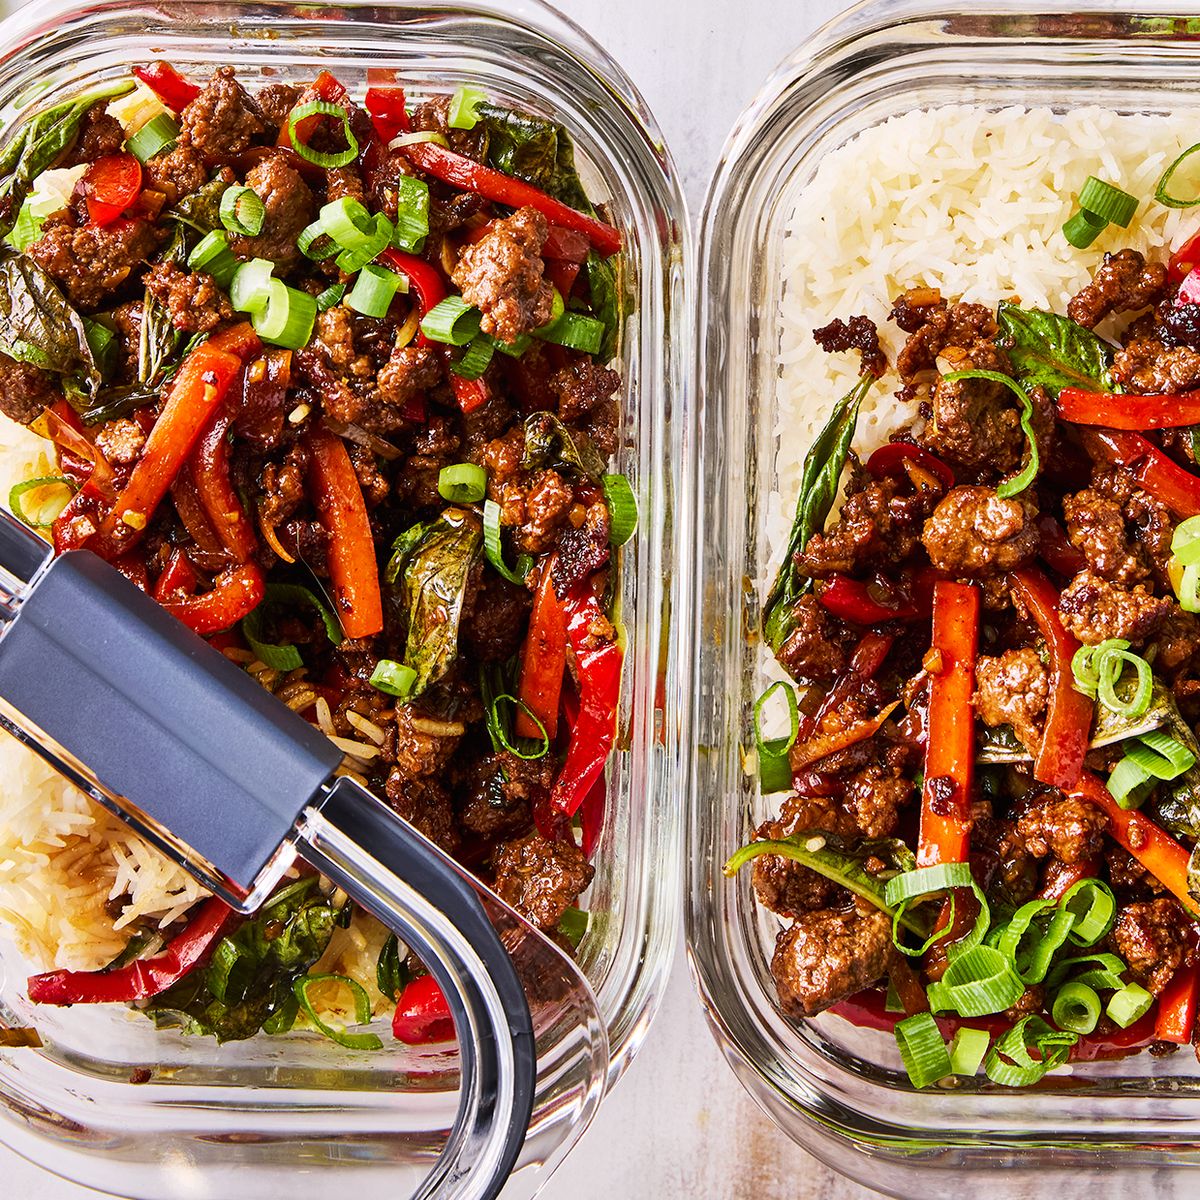 high-protein thai basil beef bowls are a meal prep cheat code